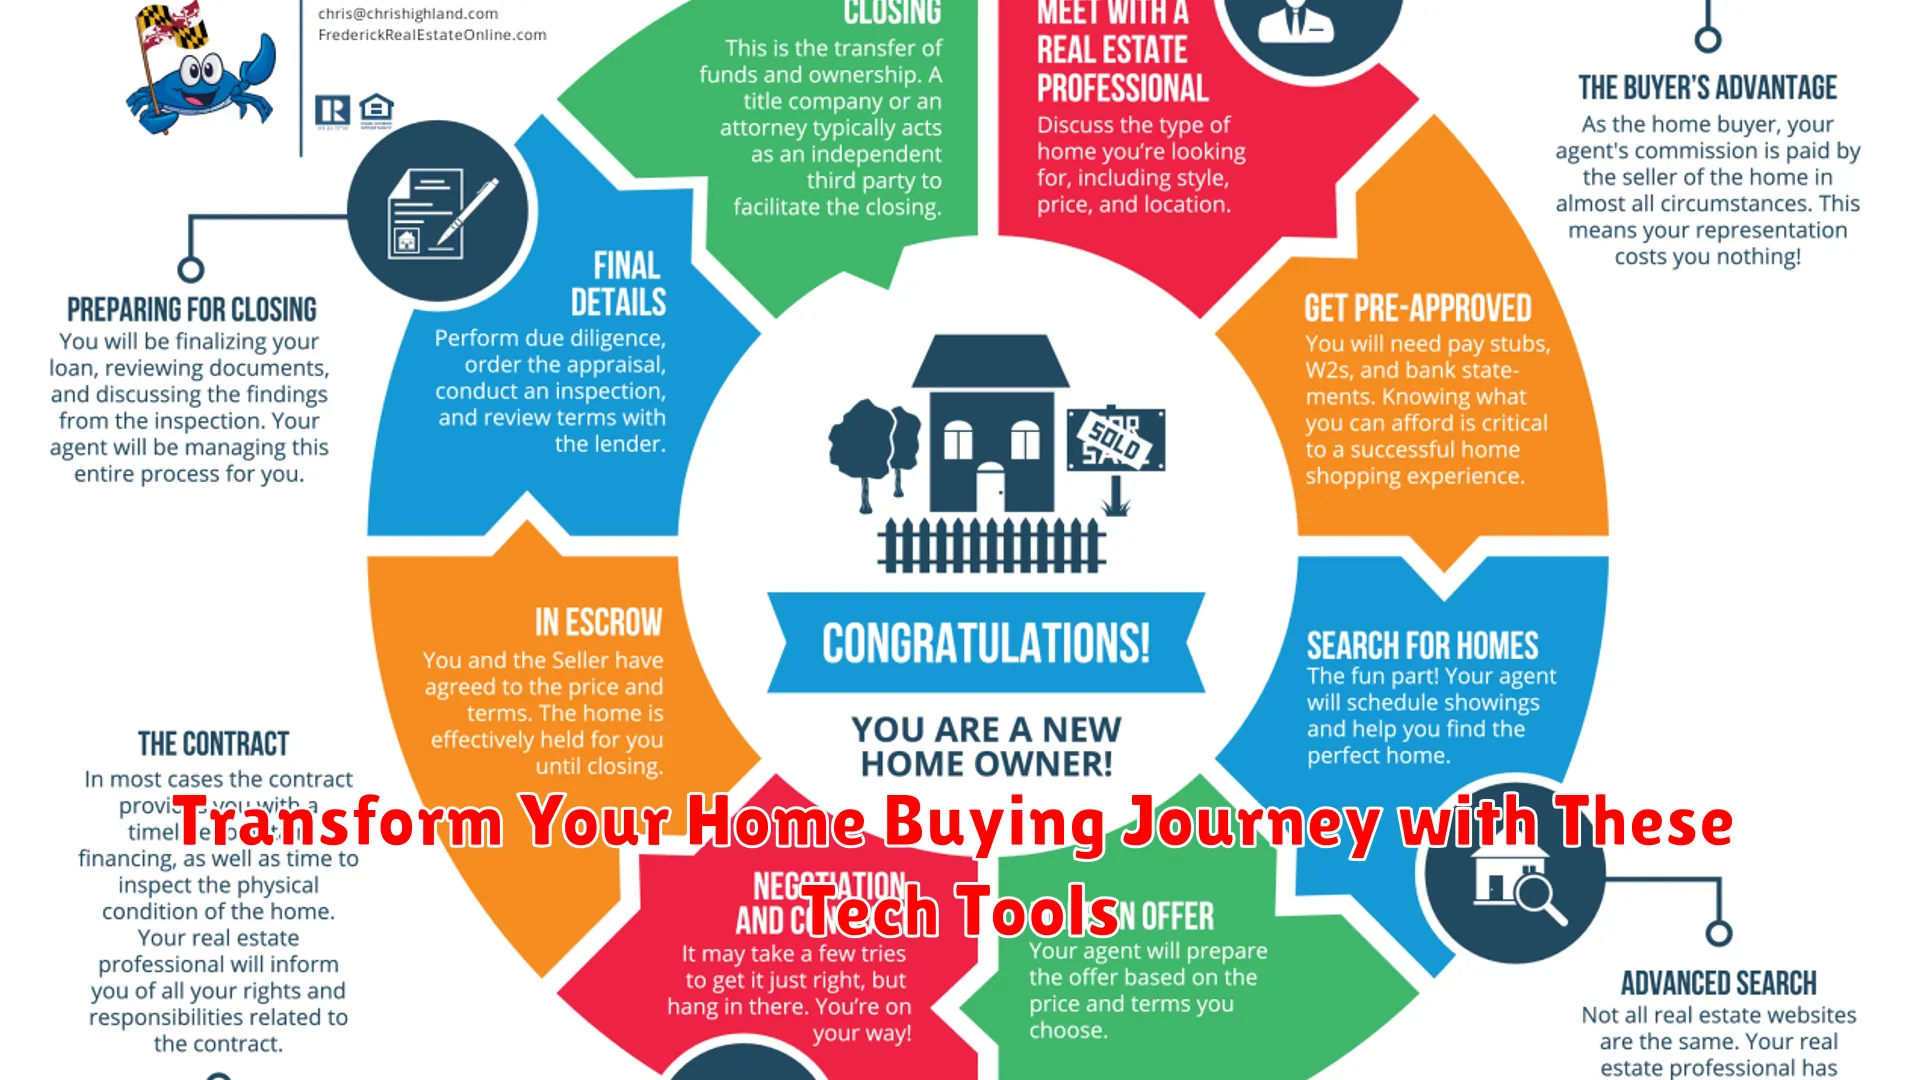 Transform Your Home Buying Journey with These Tech Tools